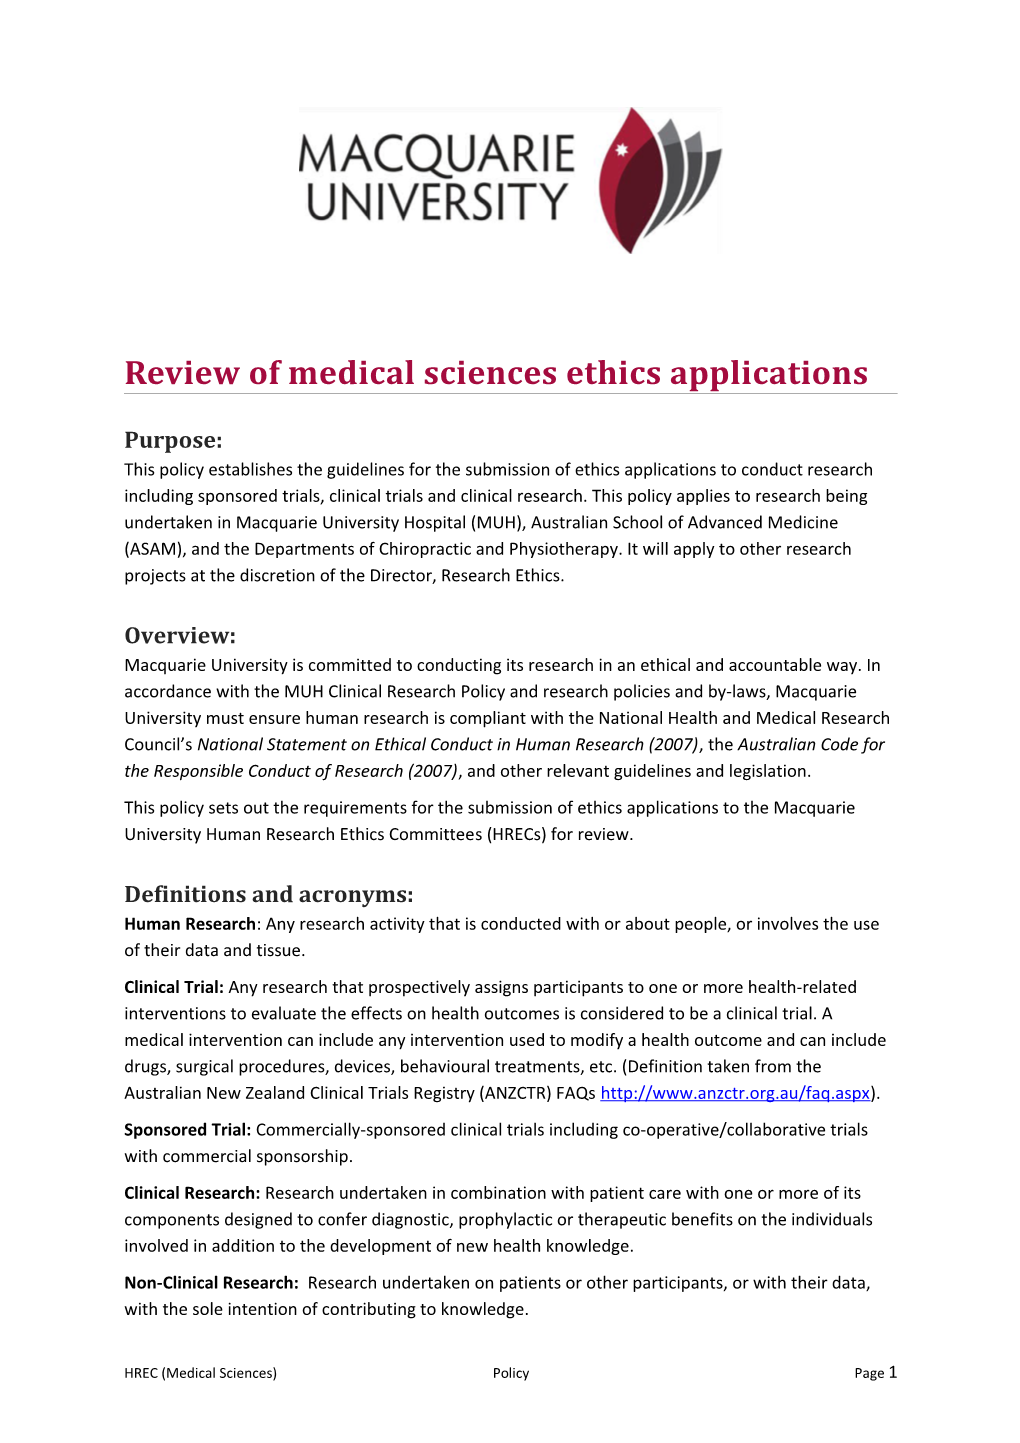 Review of Medical Sciences Ethics Applications